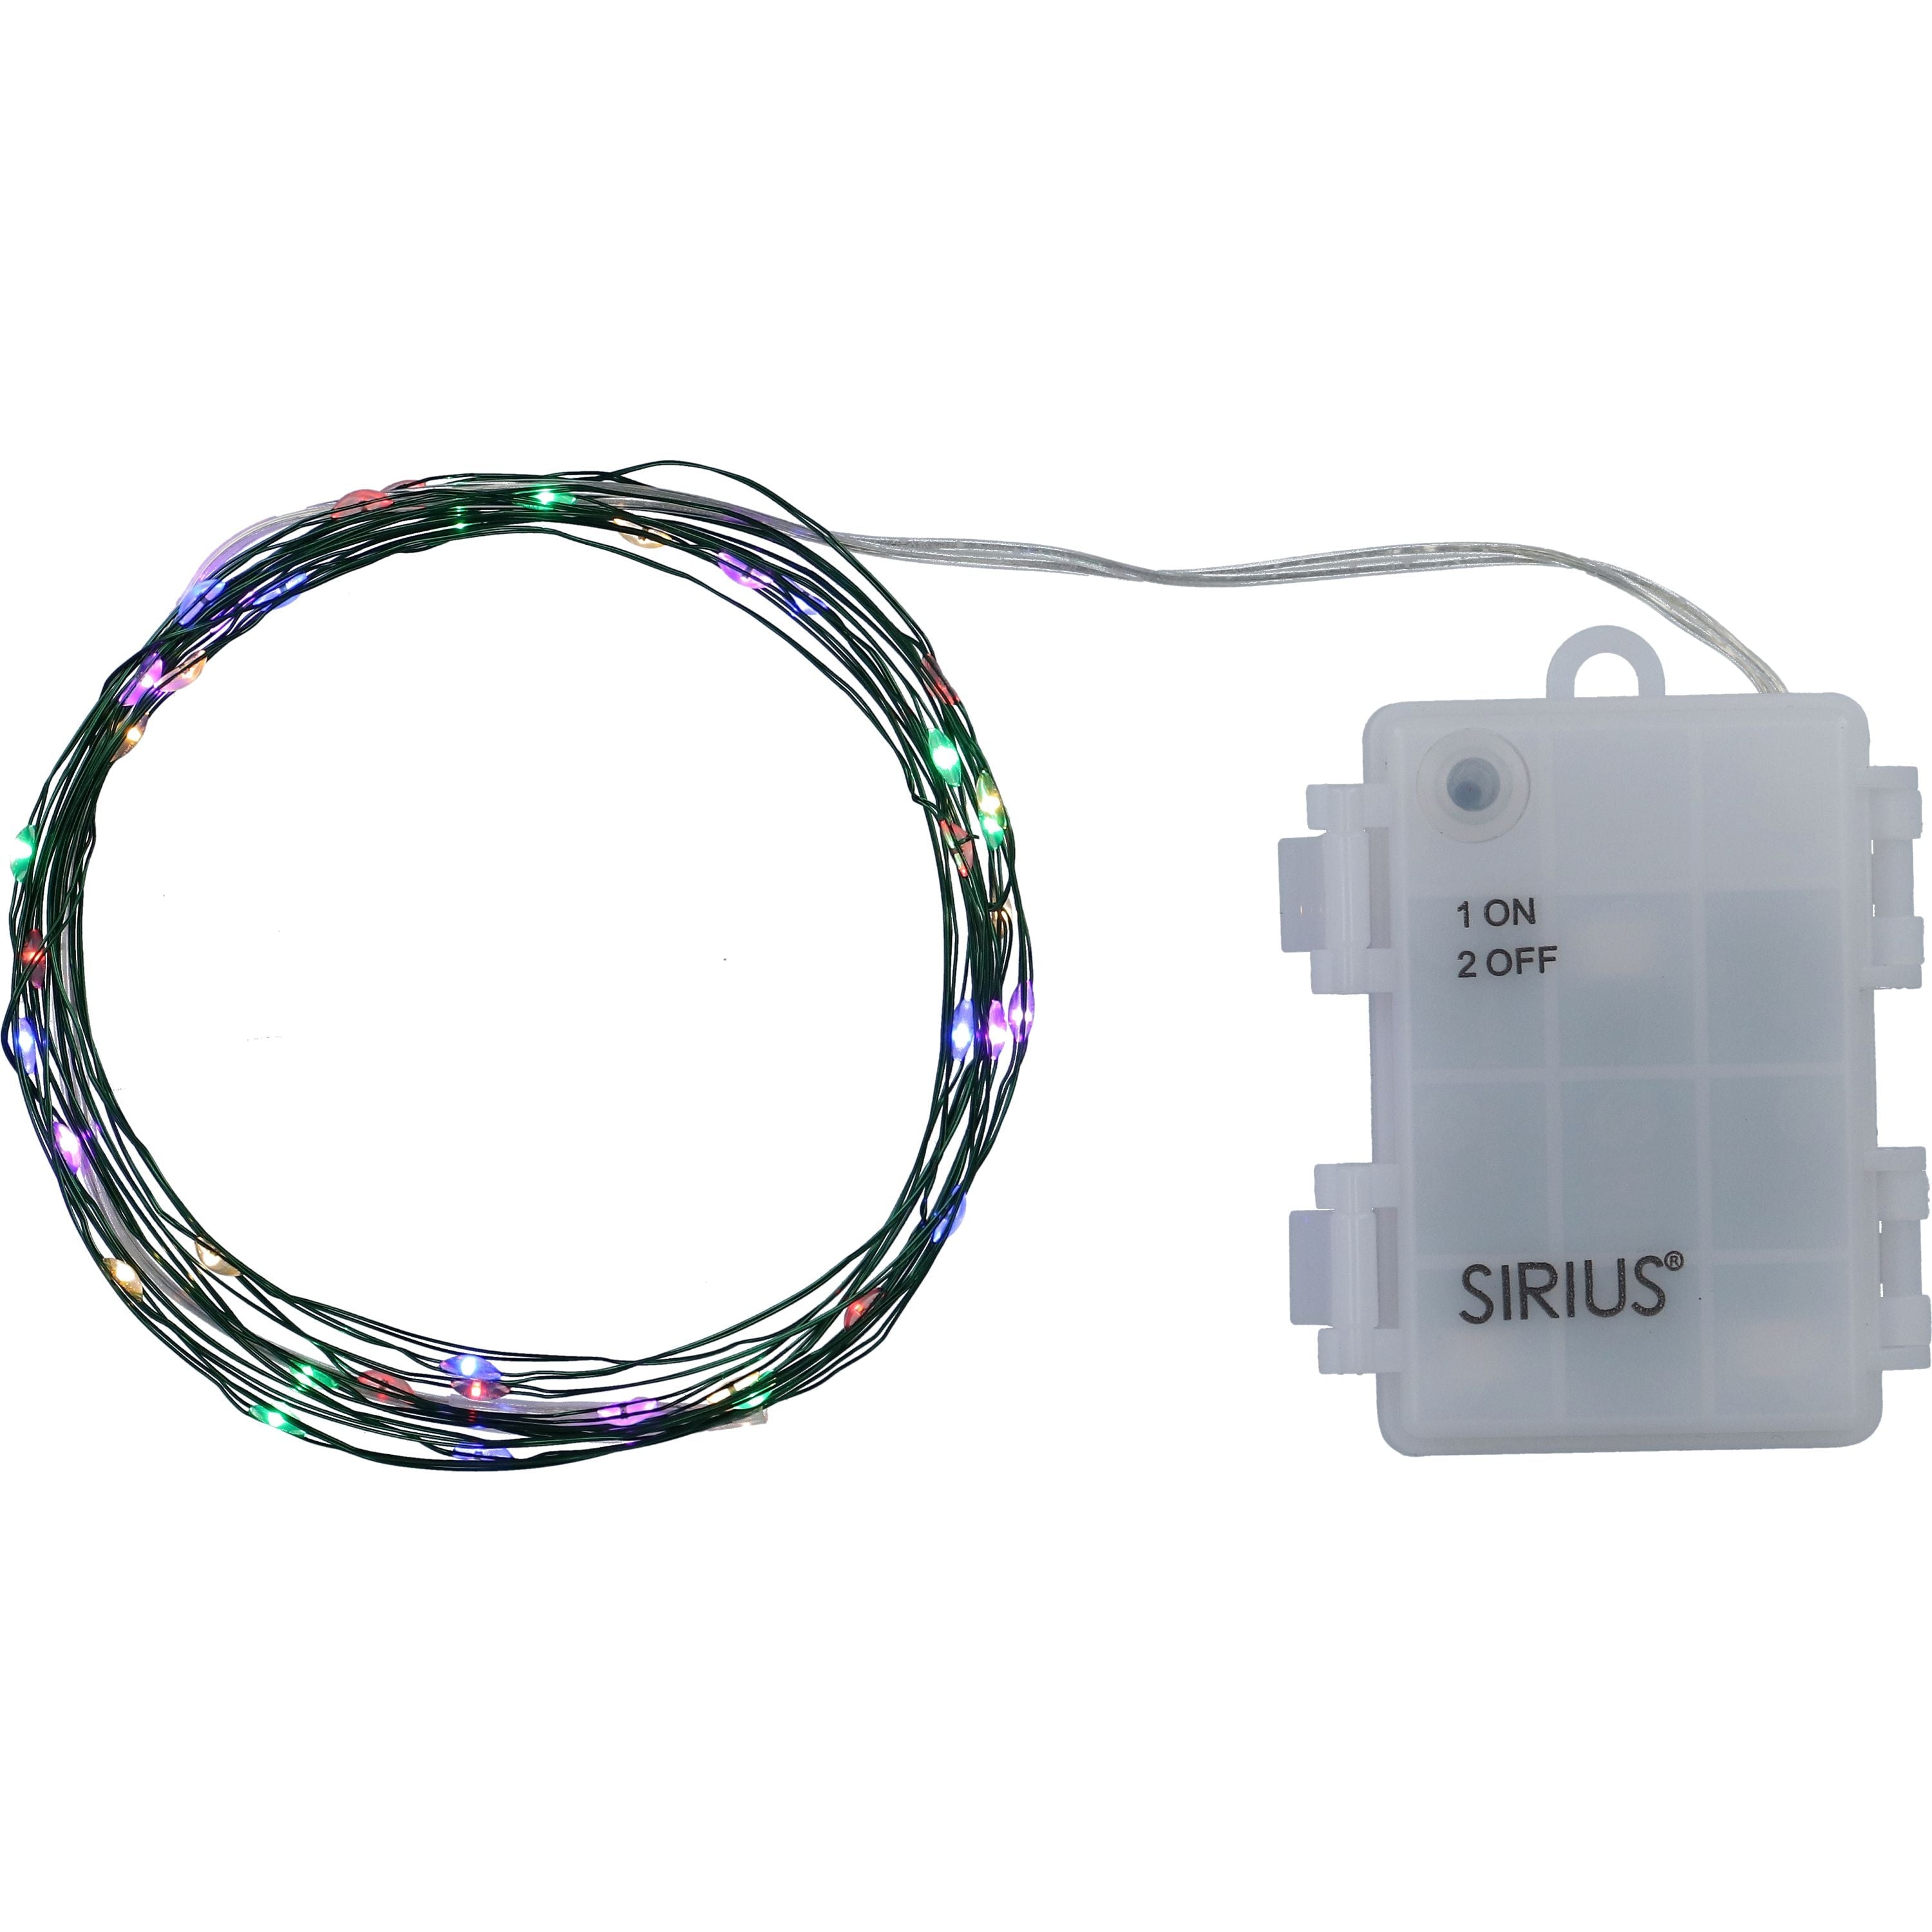 Sirius Knirke Light Chain 40 Le Ds, Multicolored/Green